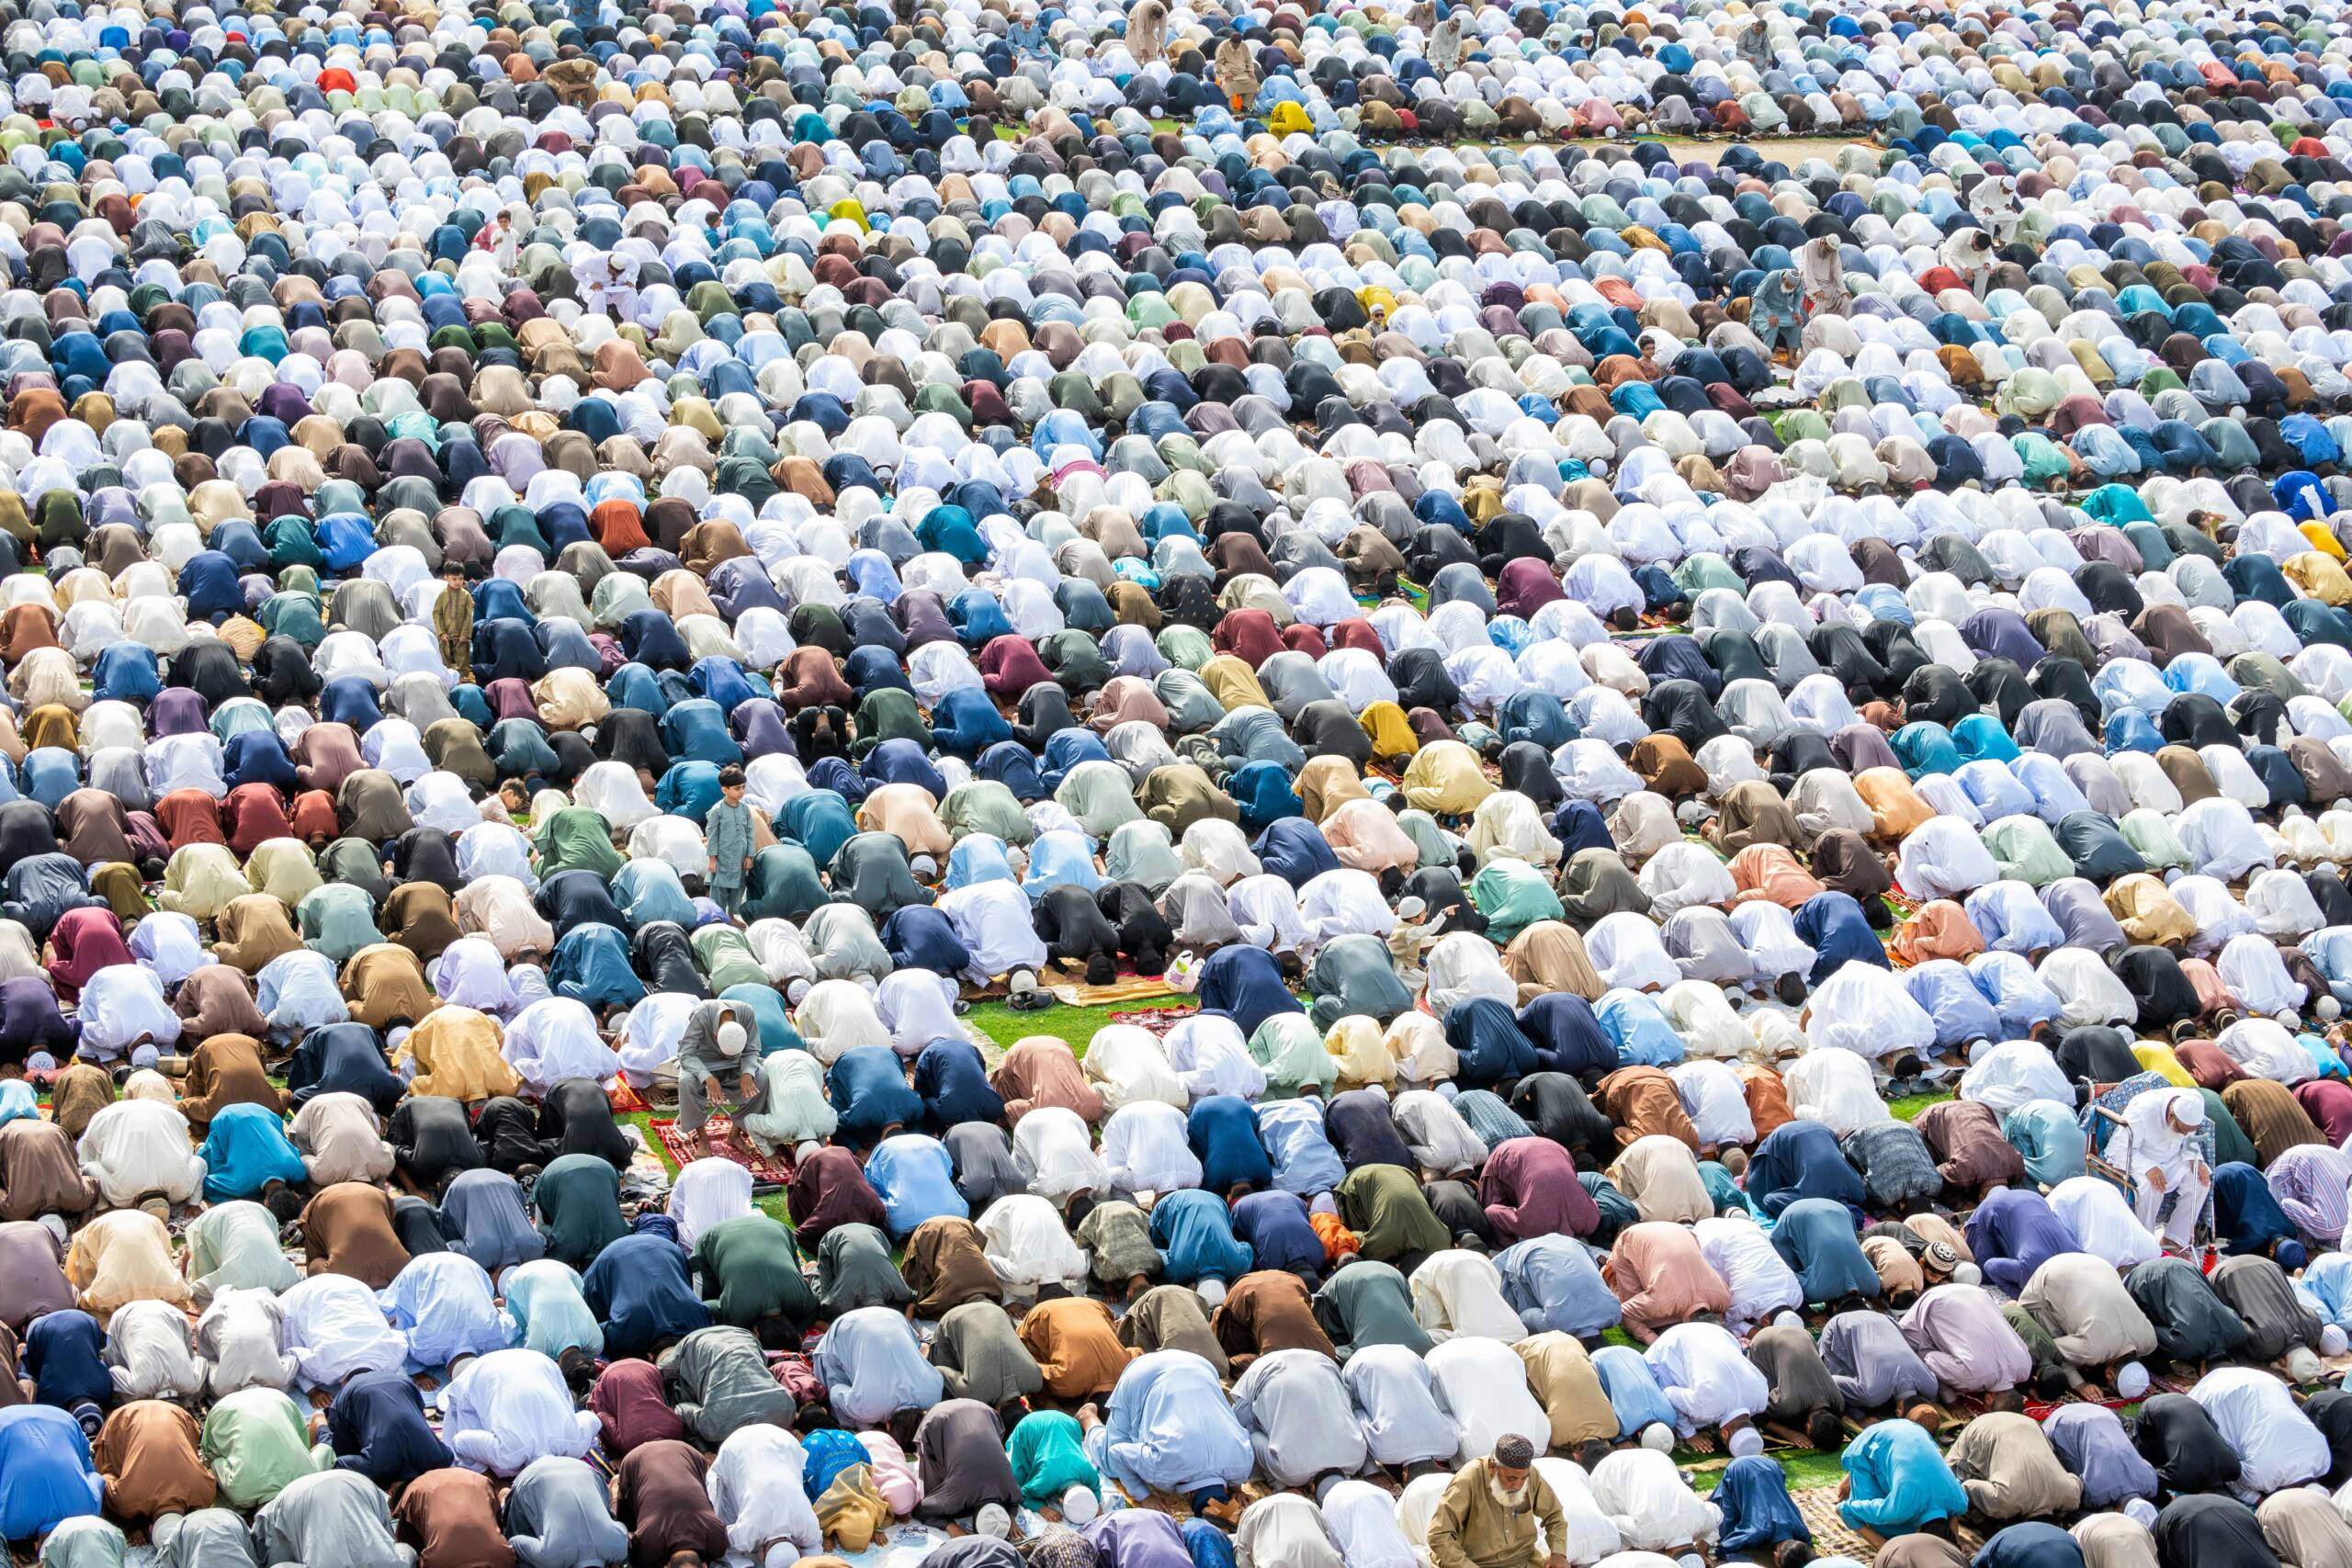 A group of people pray as part of the celebrations of Ramadan.